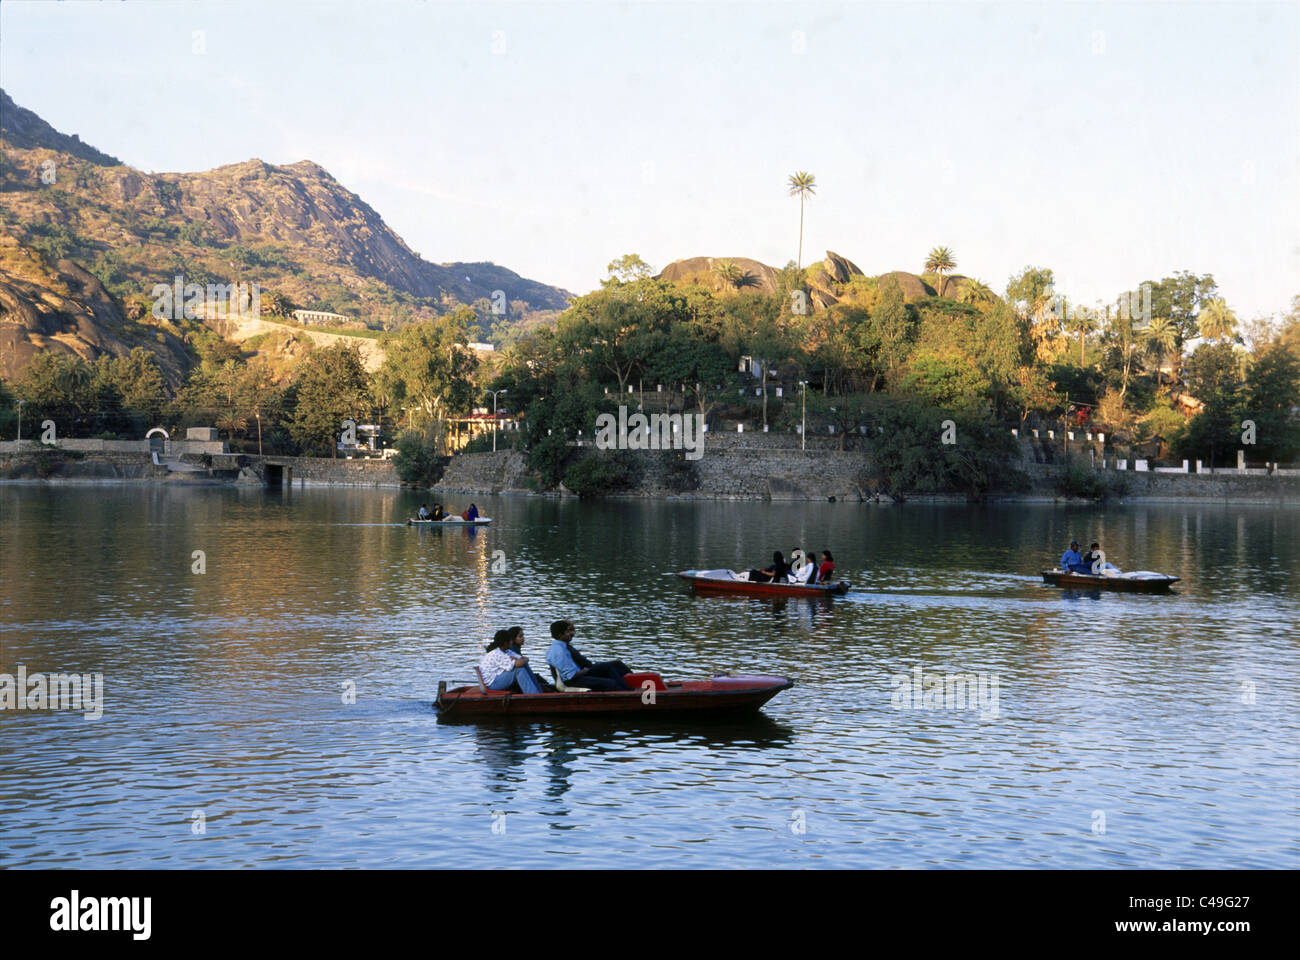 Photograph of pedal boats on an artificial lake in India Stock Photo